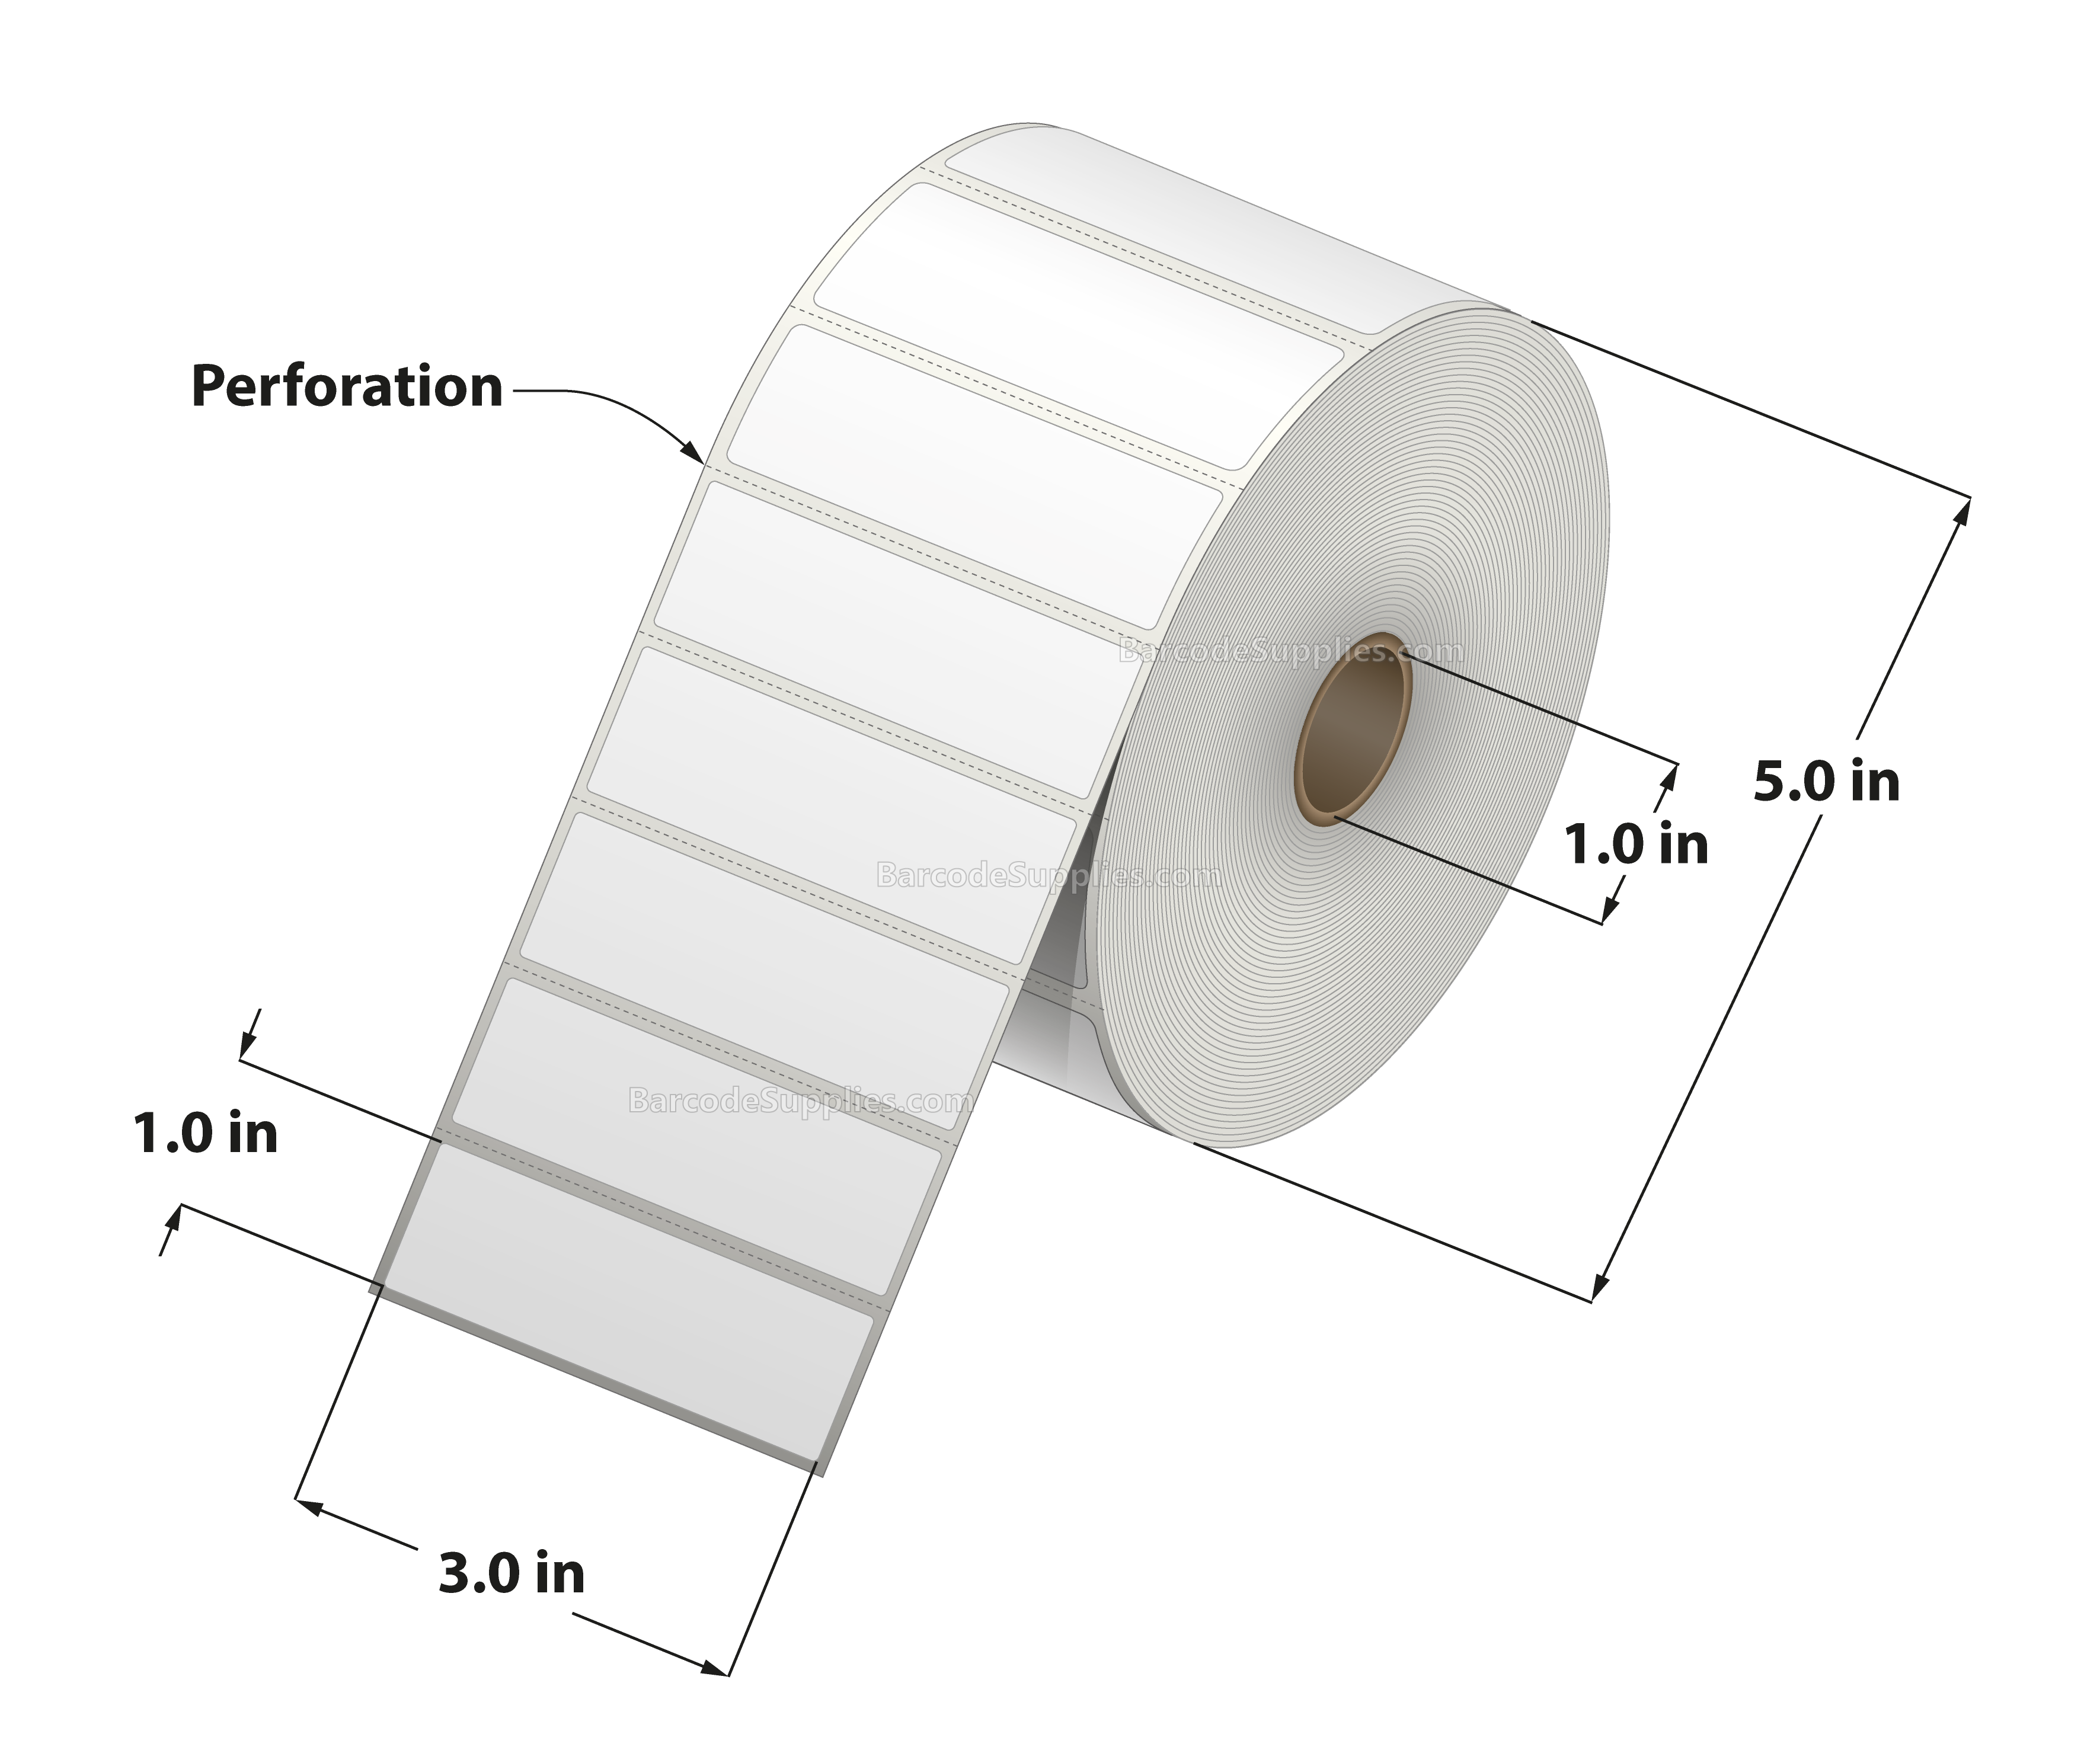 3 x 1 Direct Thermal White Labels With Acrylic Adhesive - Perforated - 2500 Labels Per Roll - Carton Of 12 Rolls - 30000 Labels Total - MPN: RD-3-1-2500-1 - BarcodeSource, Inc.